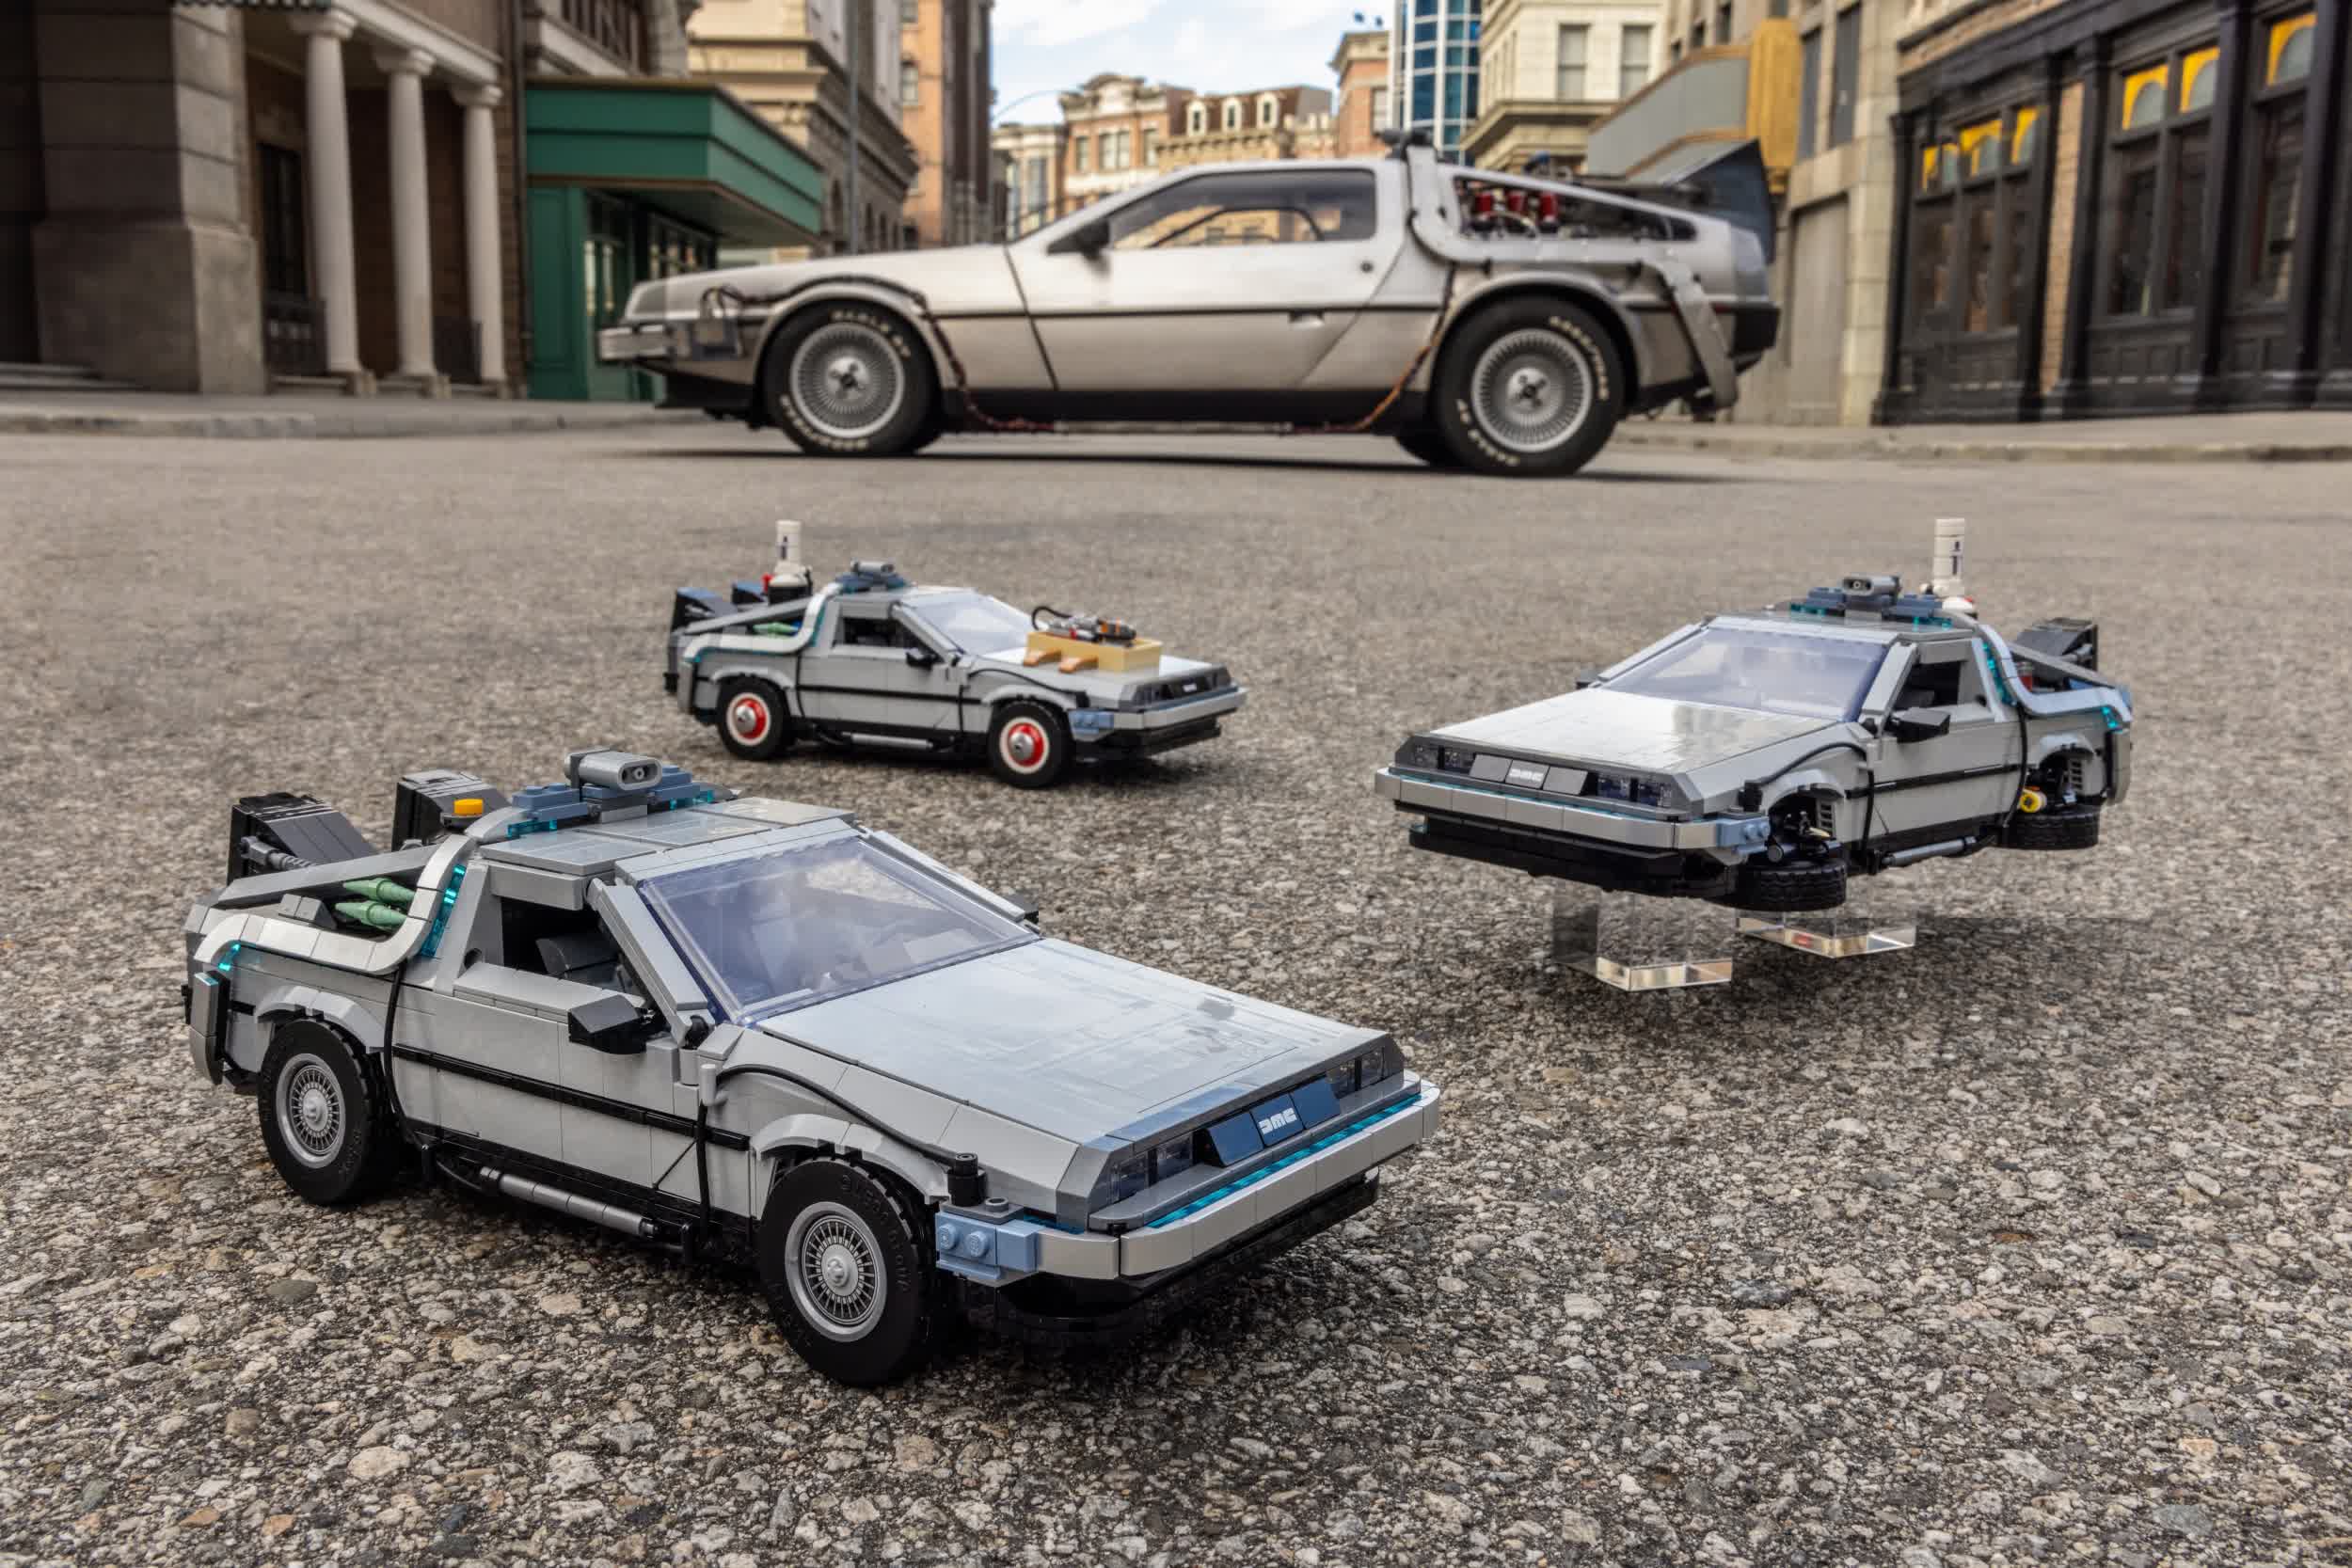 Lego's new 3-in-1 DeLorean Time Machine is a must for Back to the Future fans